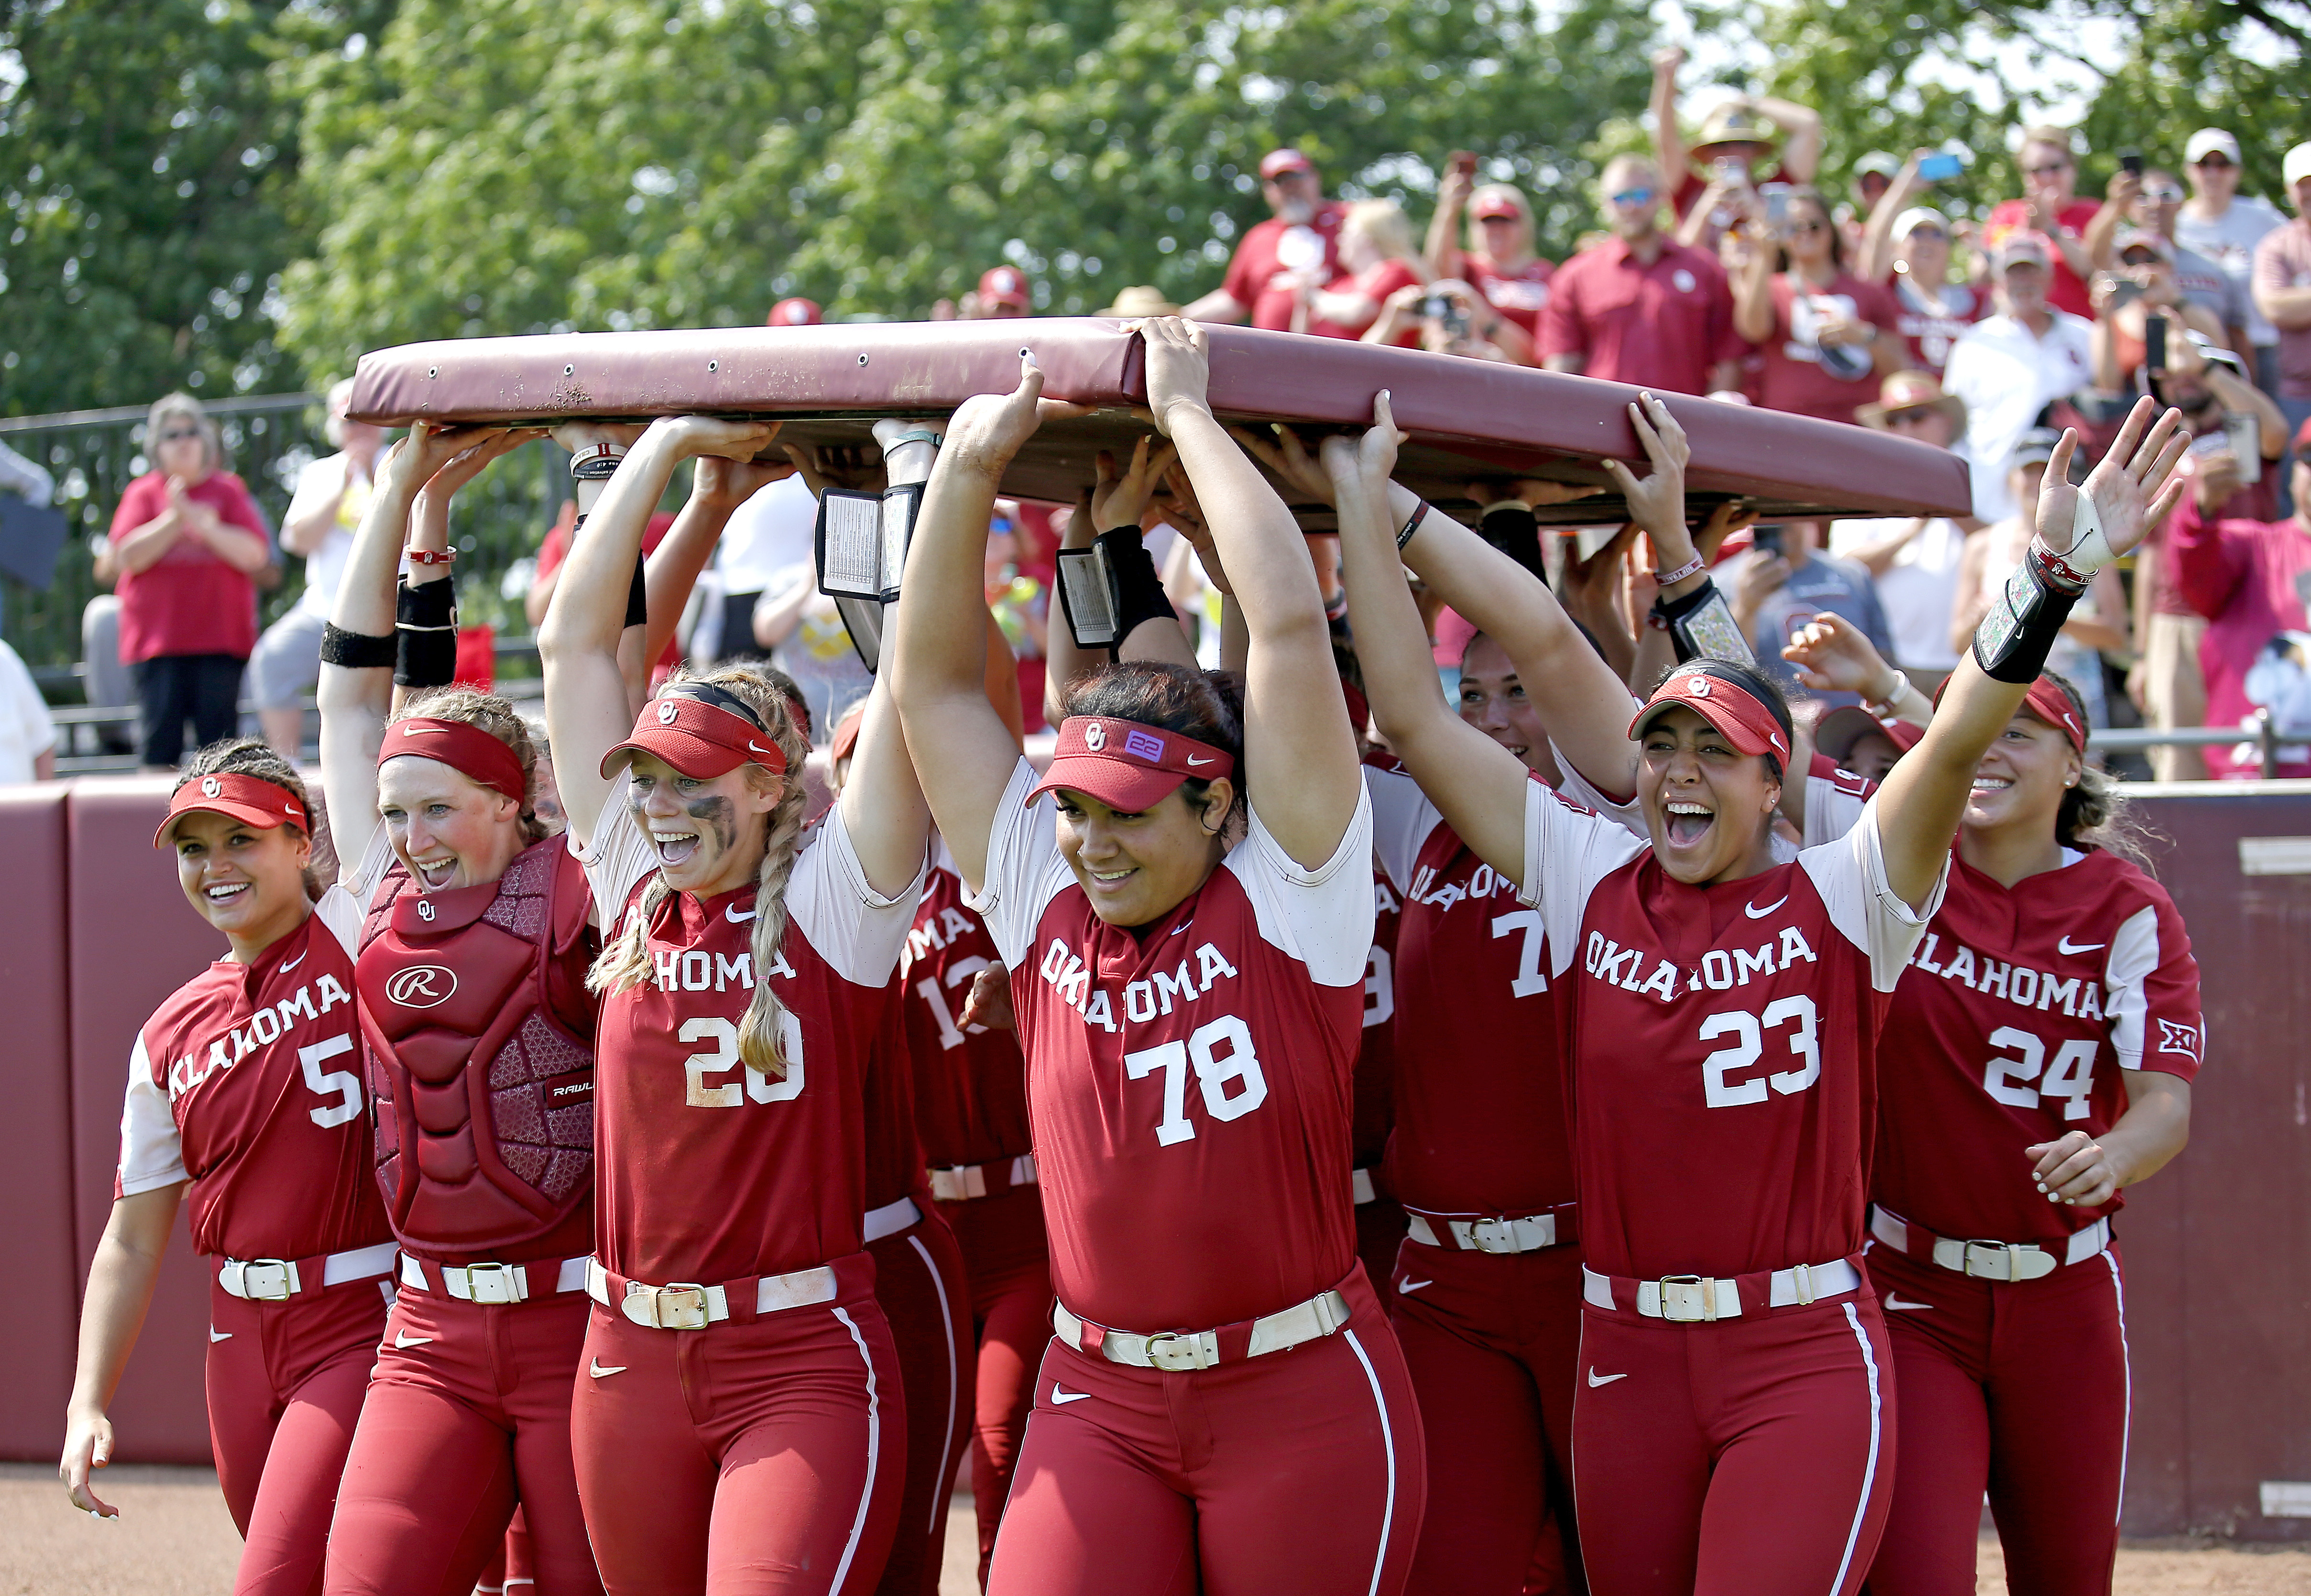 2022 NCAA Softball Womens College World Series How to watch, schedule, stream online for free